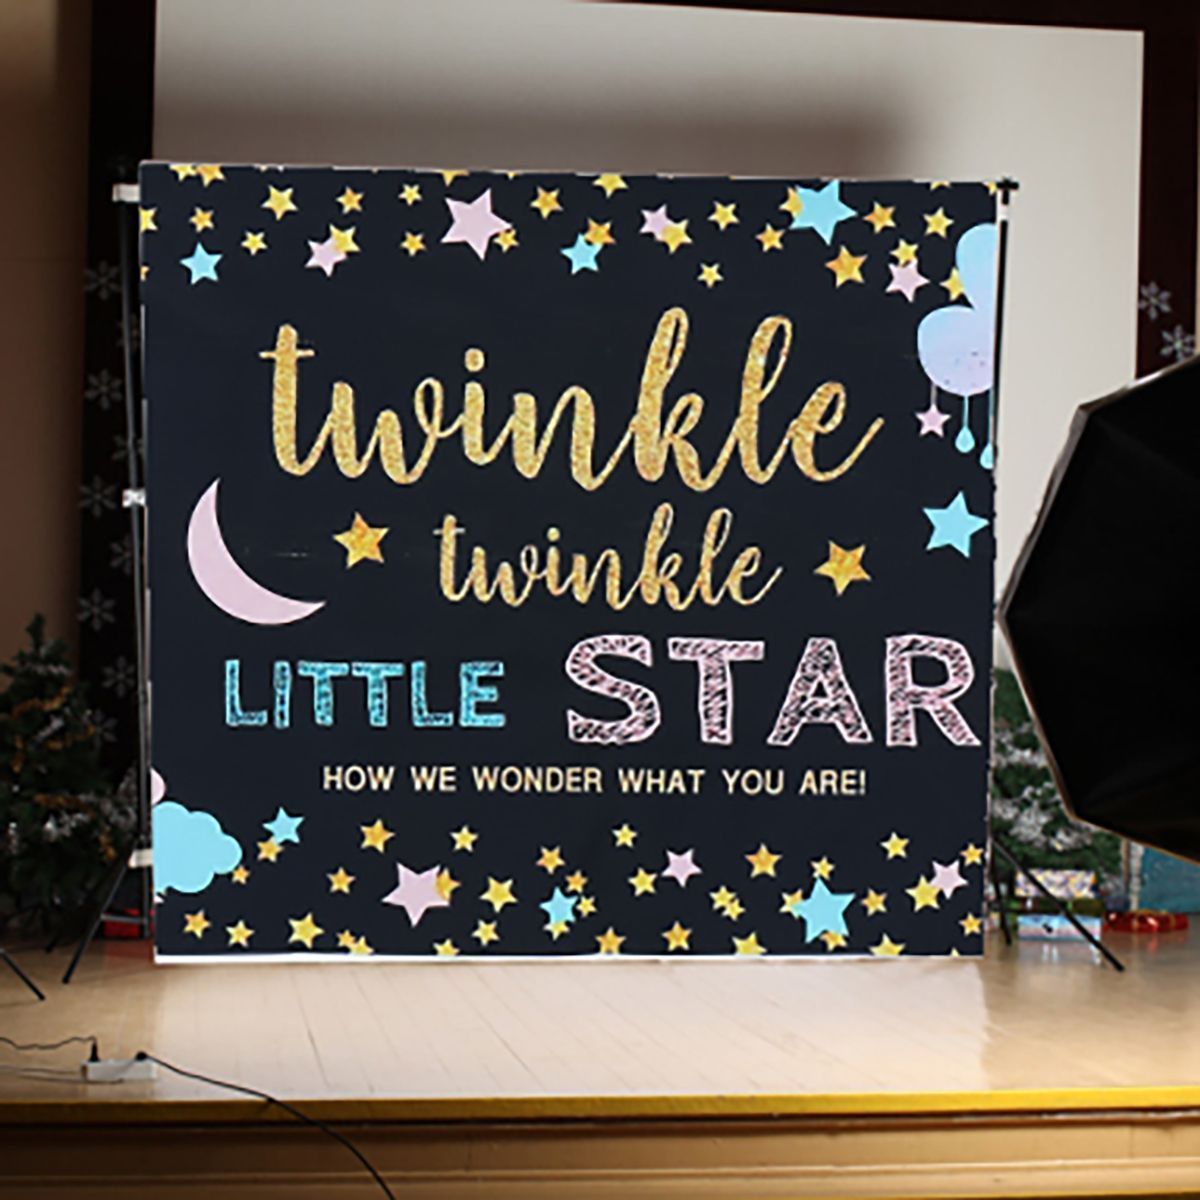 Little-Star-Backdrop-Baby-Shower-Photography-Background-Party-Banner-Backdrops-150x100cm-220x150cm-2-1717697